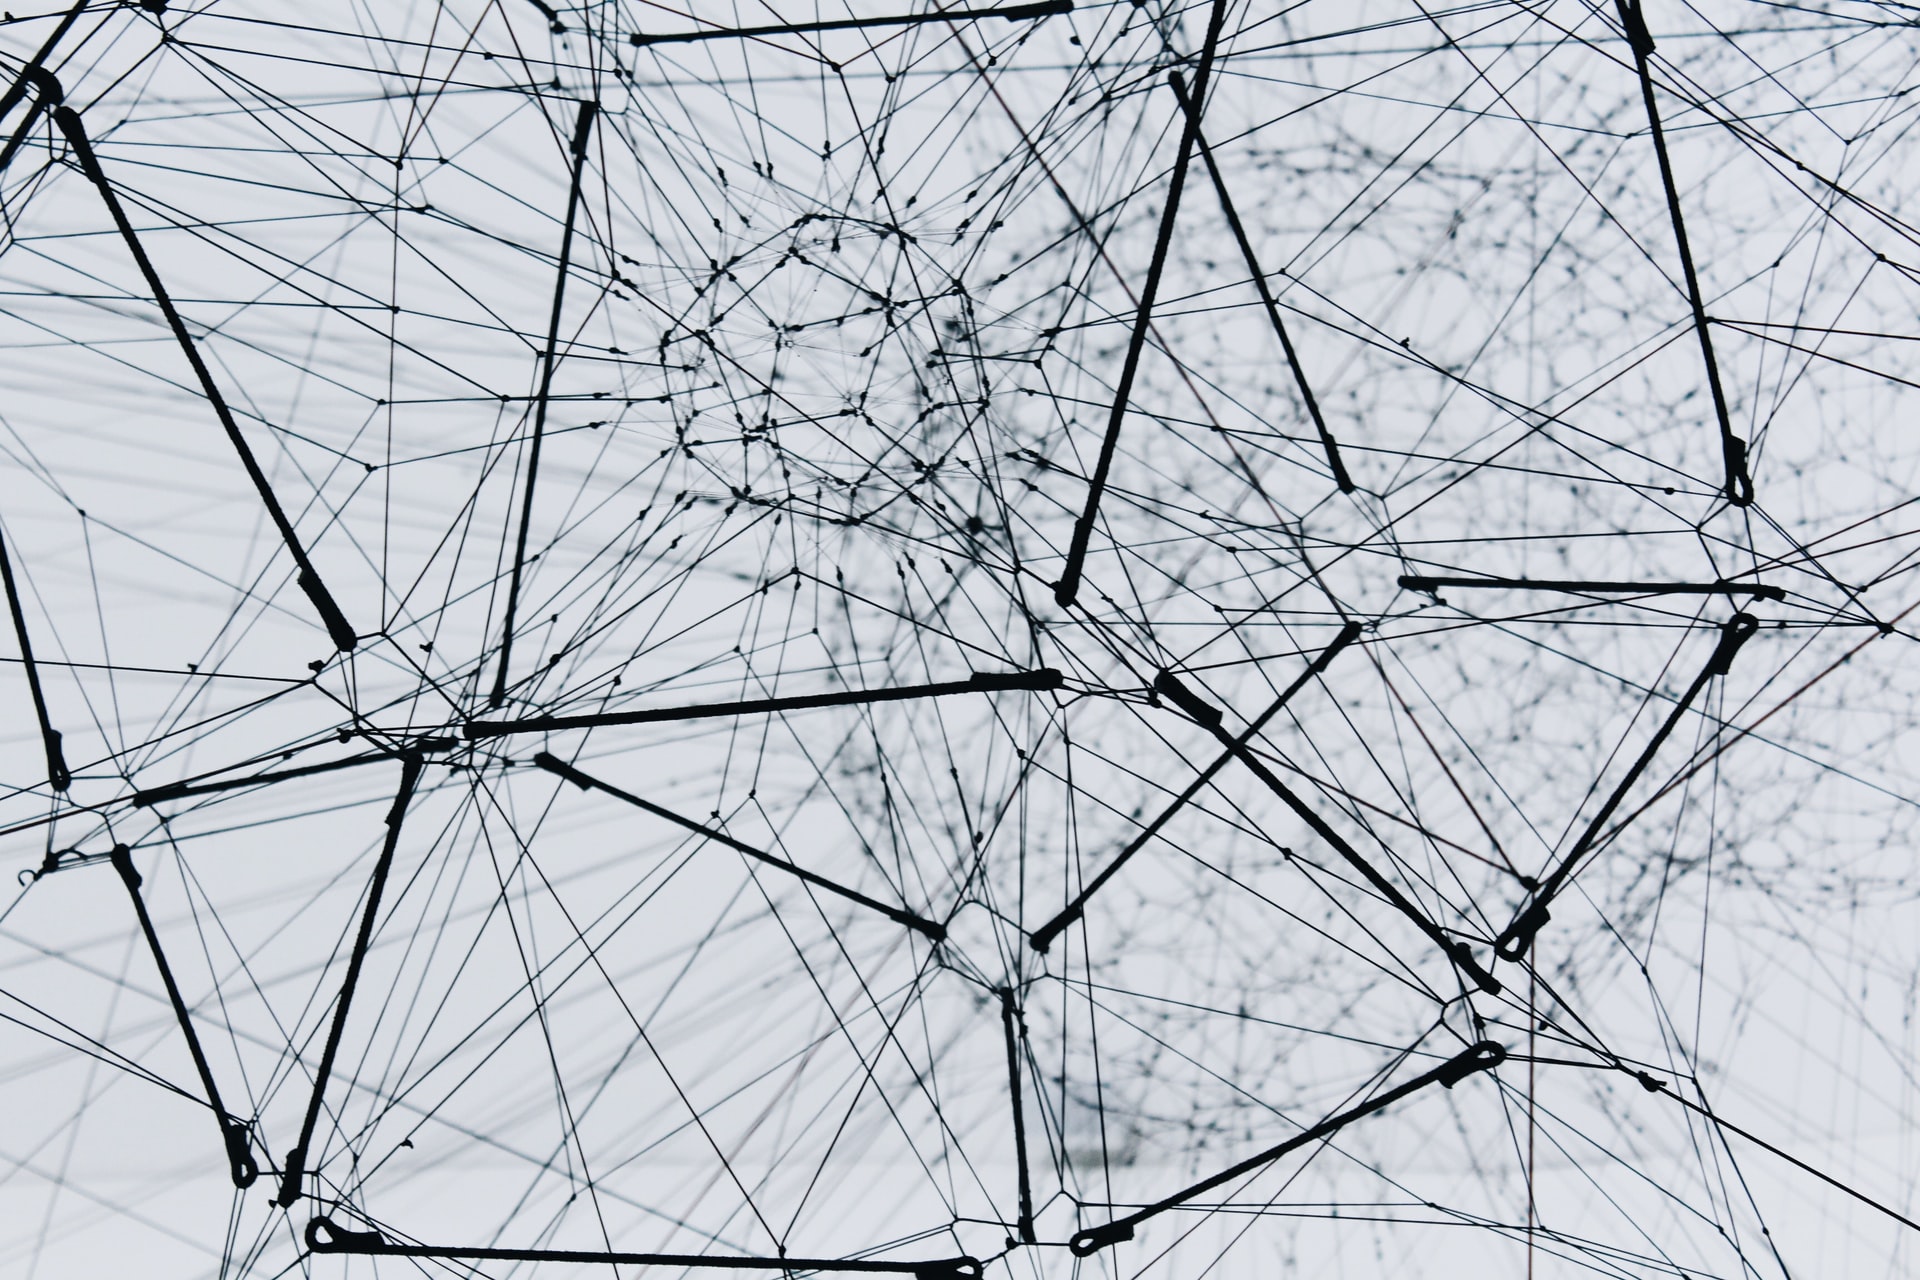 A metallic structure resembling a network of nodes and edges